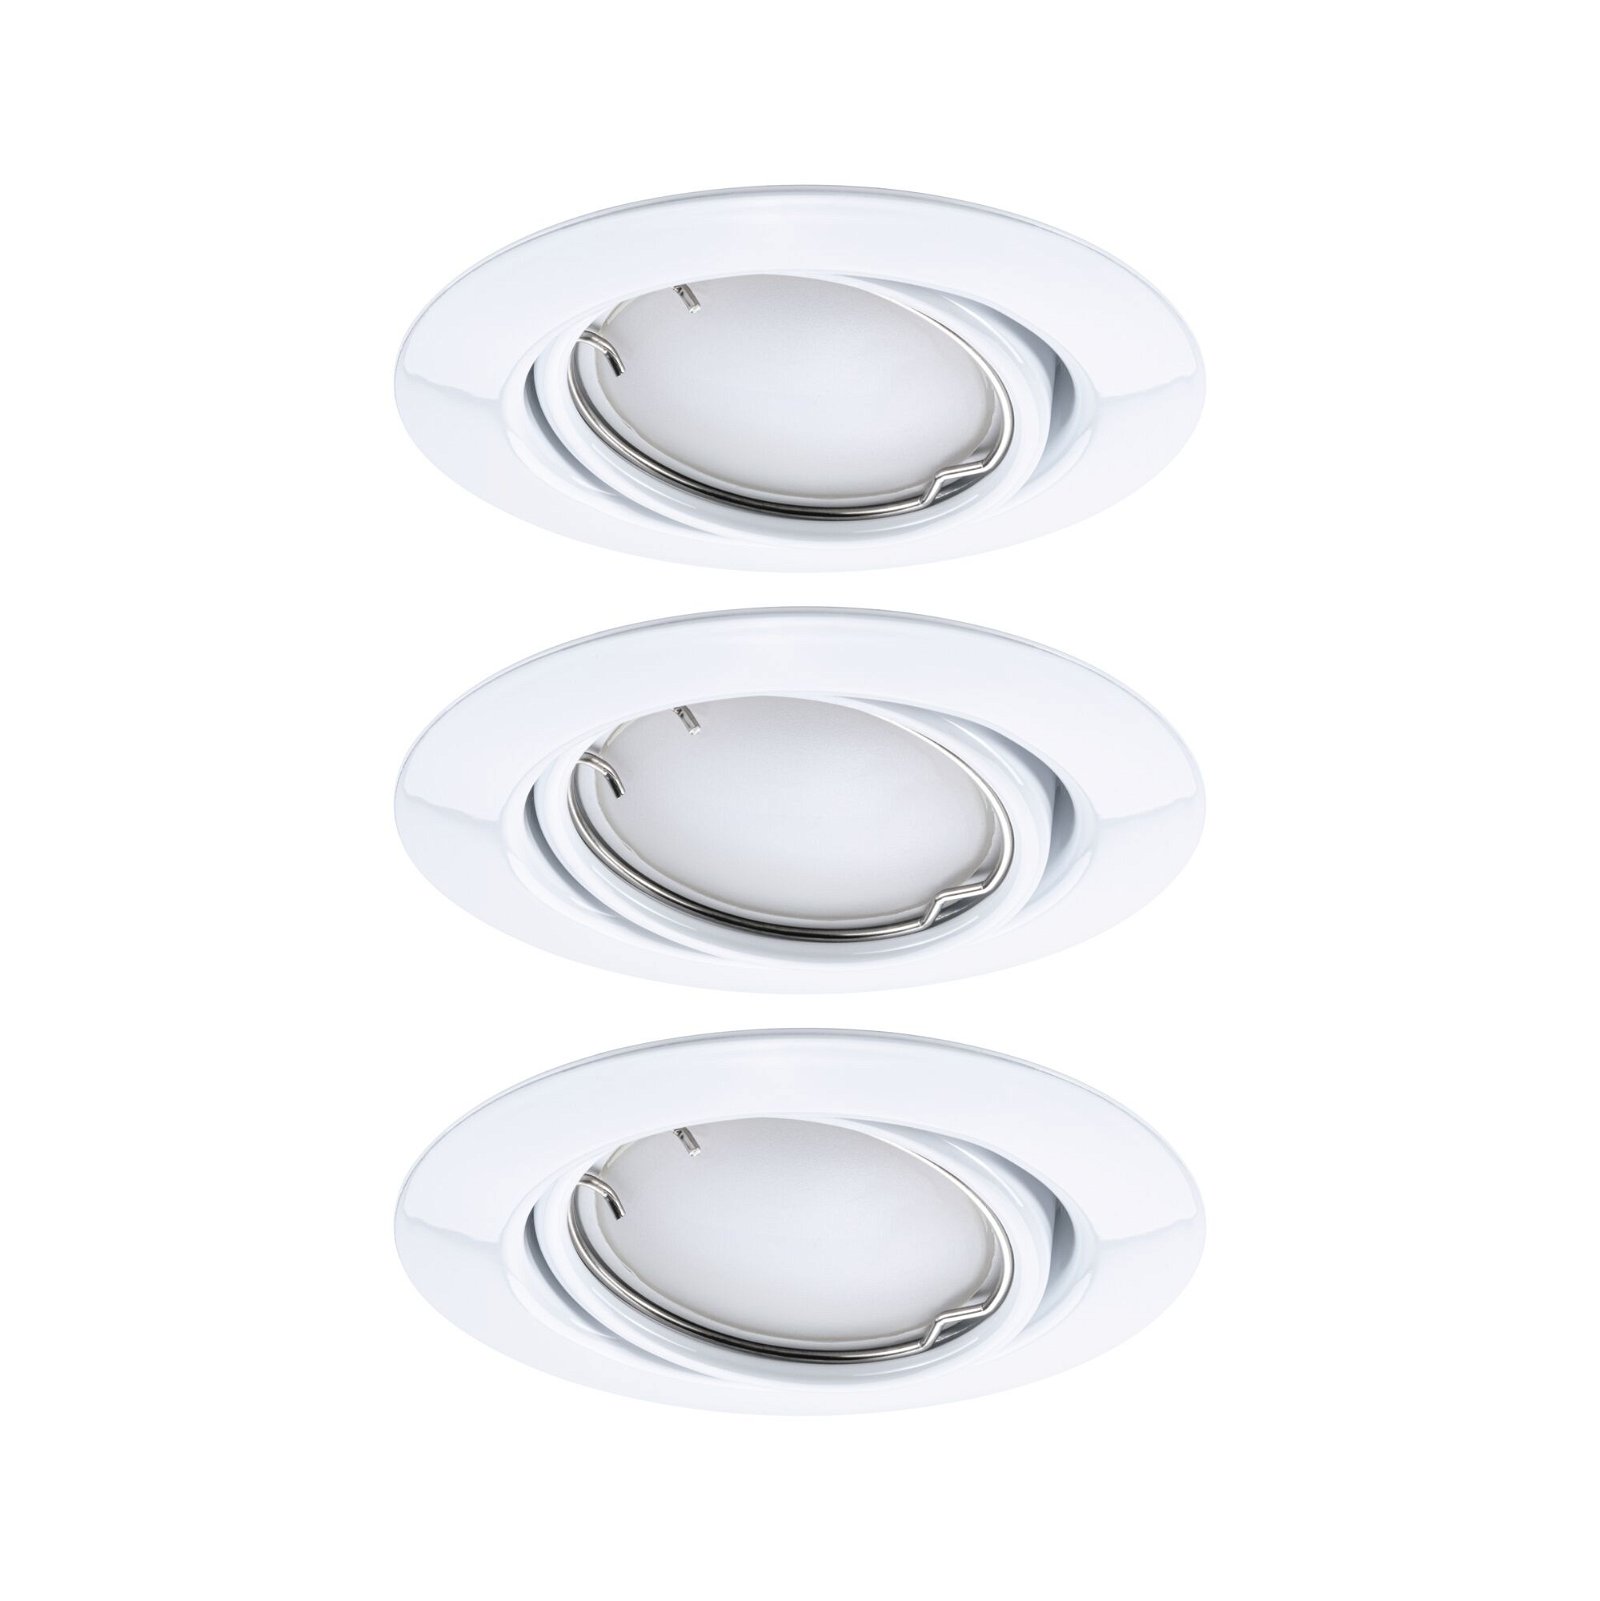 LED Recessed luminaire Smart Home Zigbee 3.0 Base Coin Basic Set Swivelling round 90mm 20° 3x4,9W 3x420lm 230V dimmable RGBW+ White